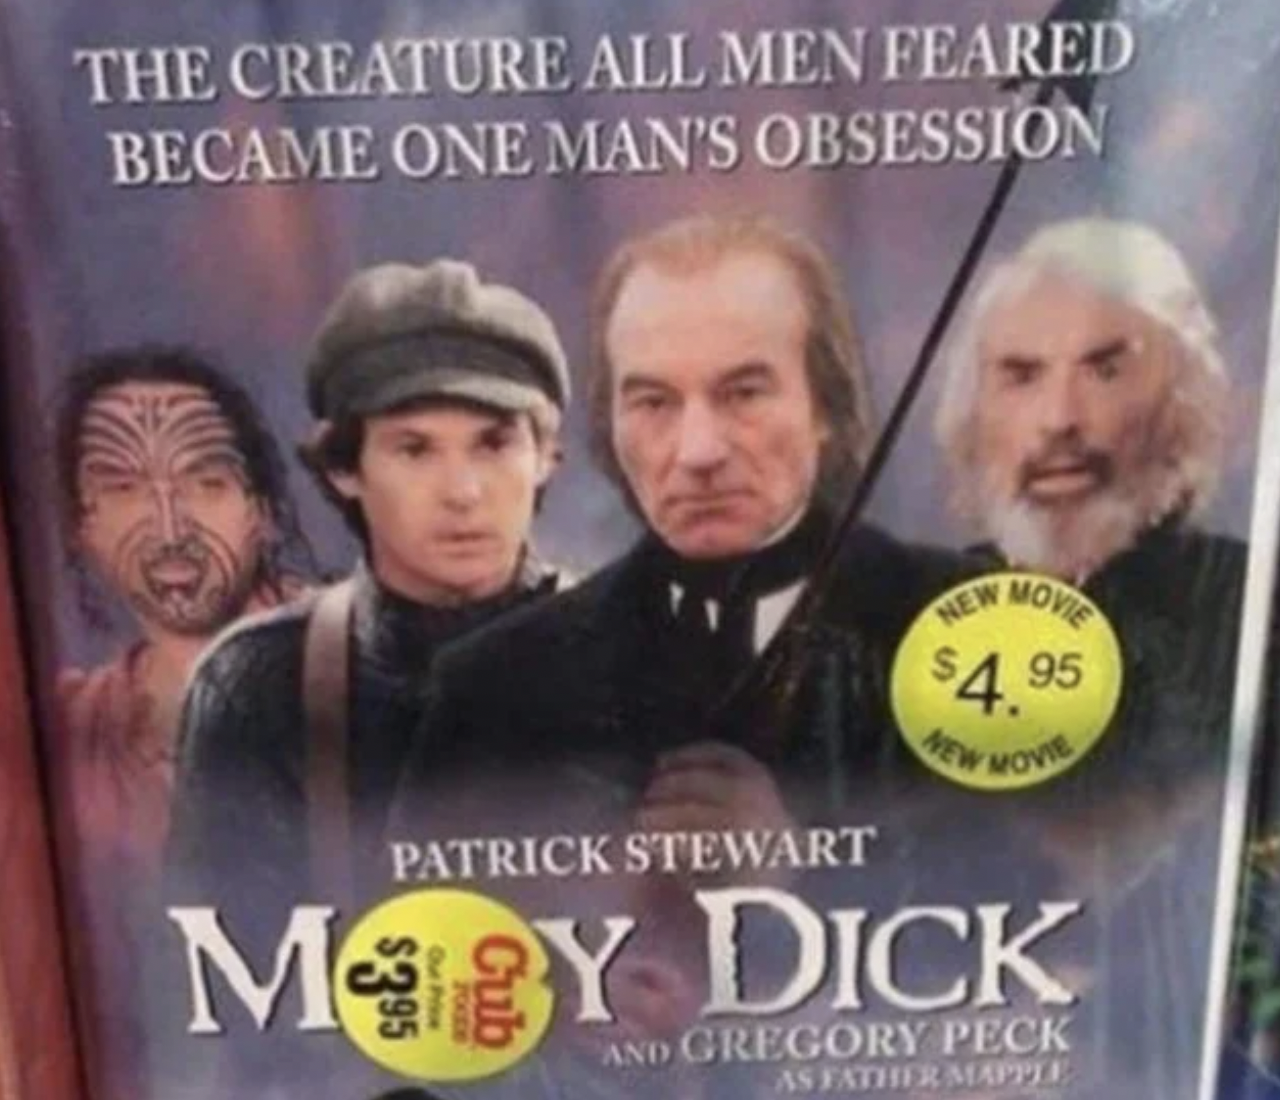 Hold Up Pictures - moby dick my dick - The Creature All Men Feared Became One Man'S Obsession New Movie $4.95 New Movie Patrick Stewart MagY Dick And Gregory Peck As Father Mapple